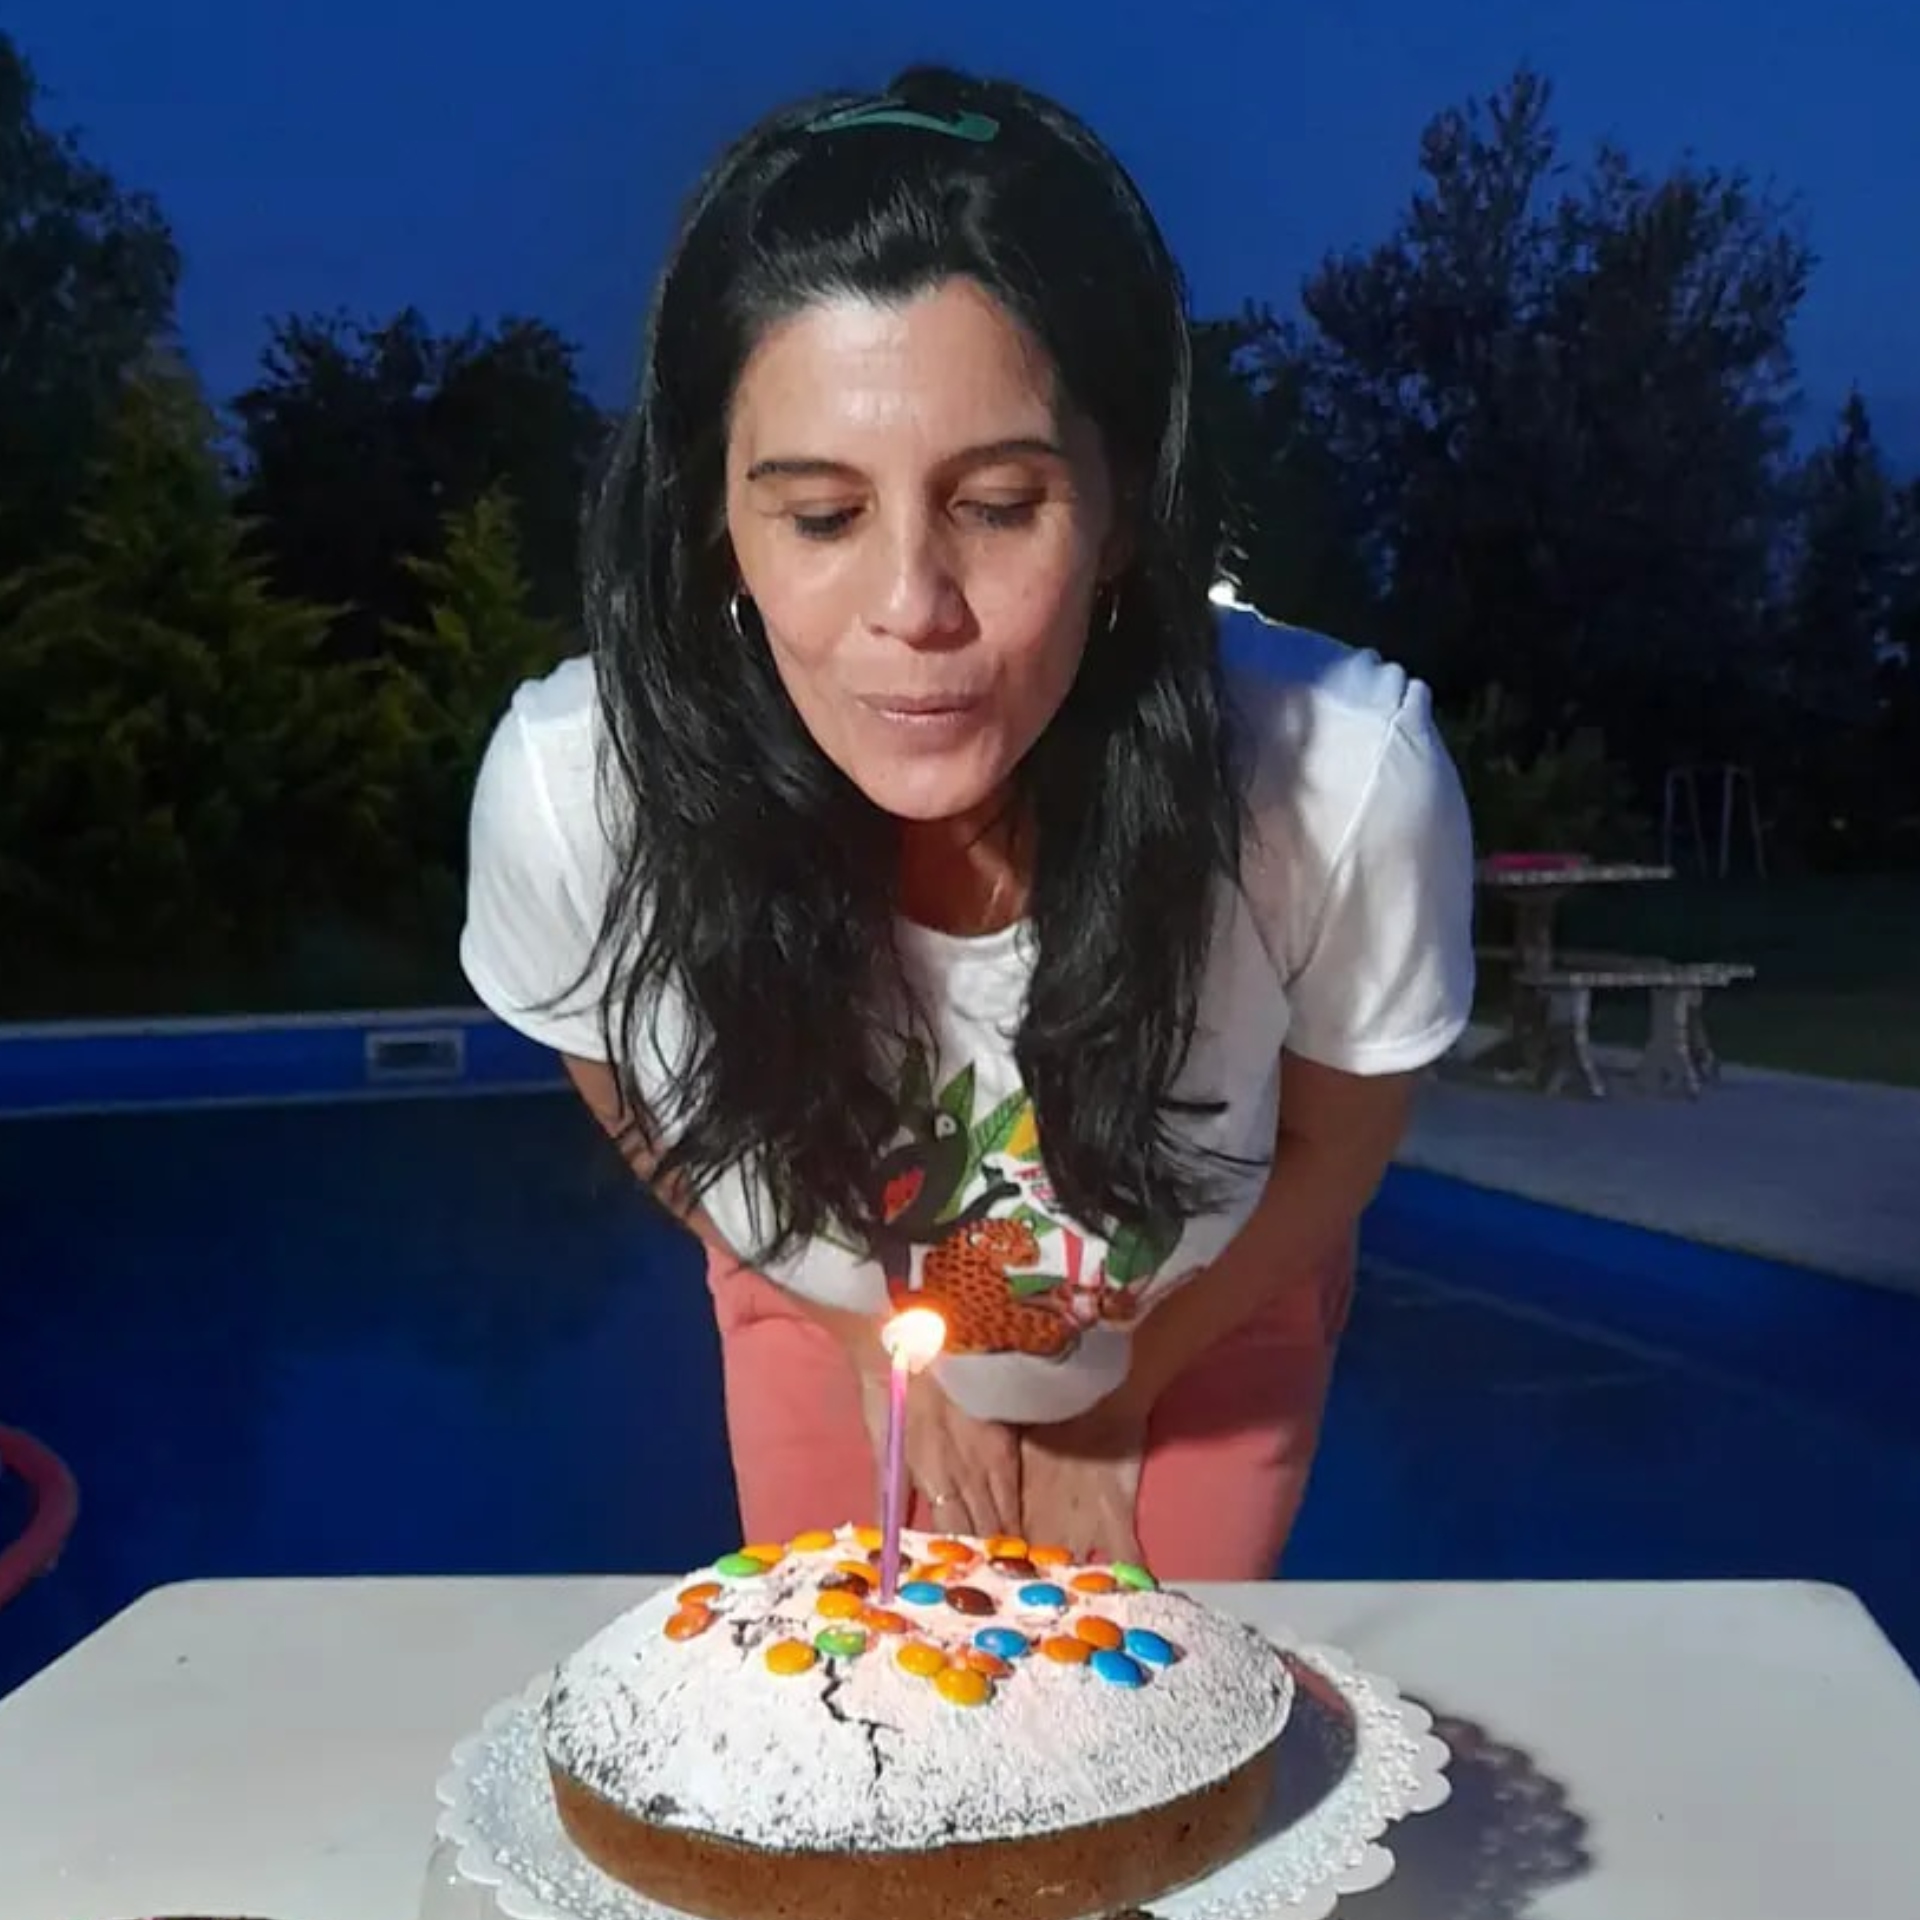 Natalia Quintiliano on her last birthday, with many wishes still to be fulfilled